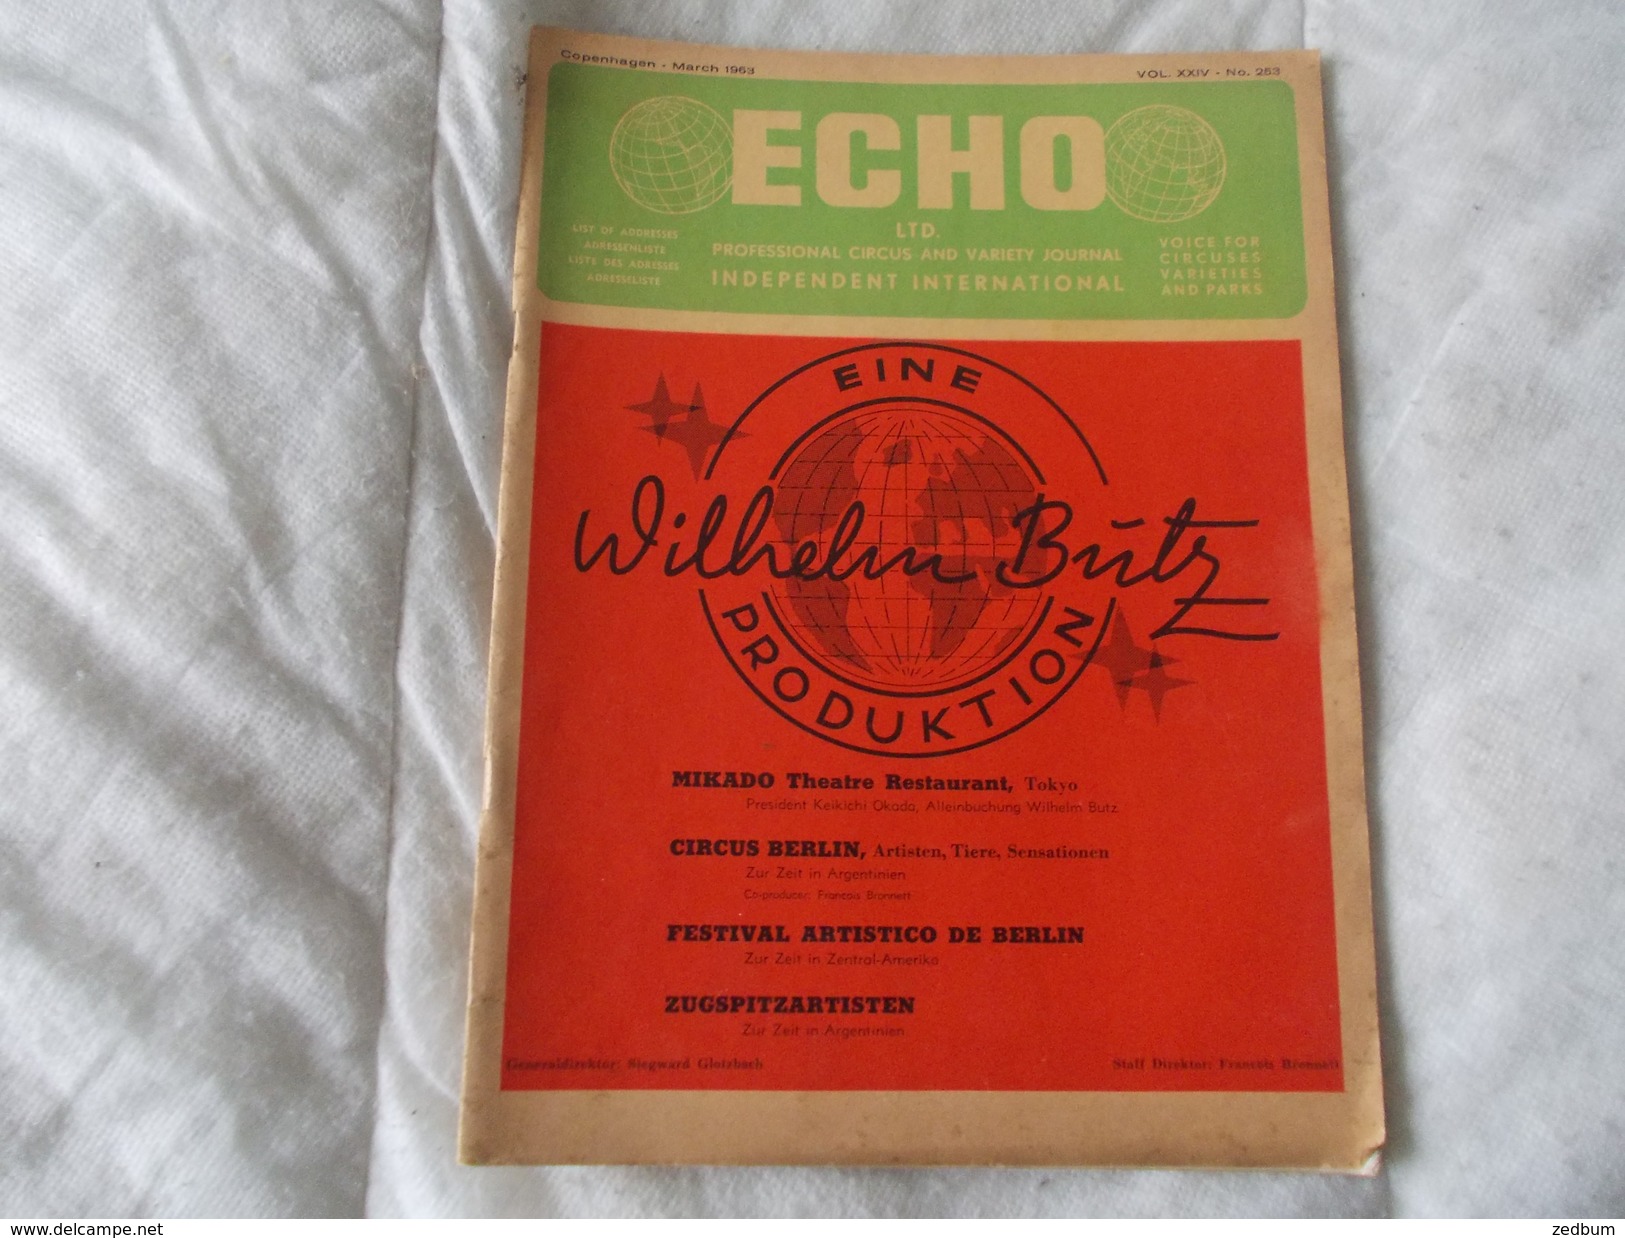 ECHO LTD Professional Circus And Variety Journal Independent International N° 253 March 1963 - Entertainment